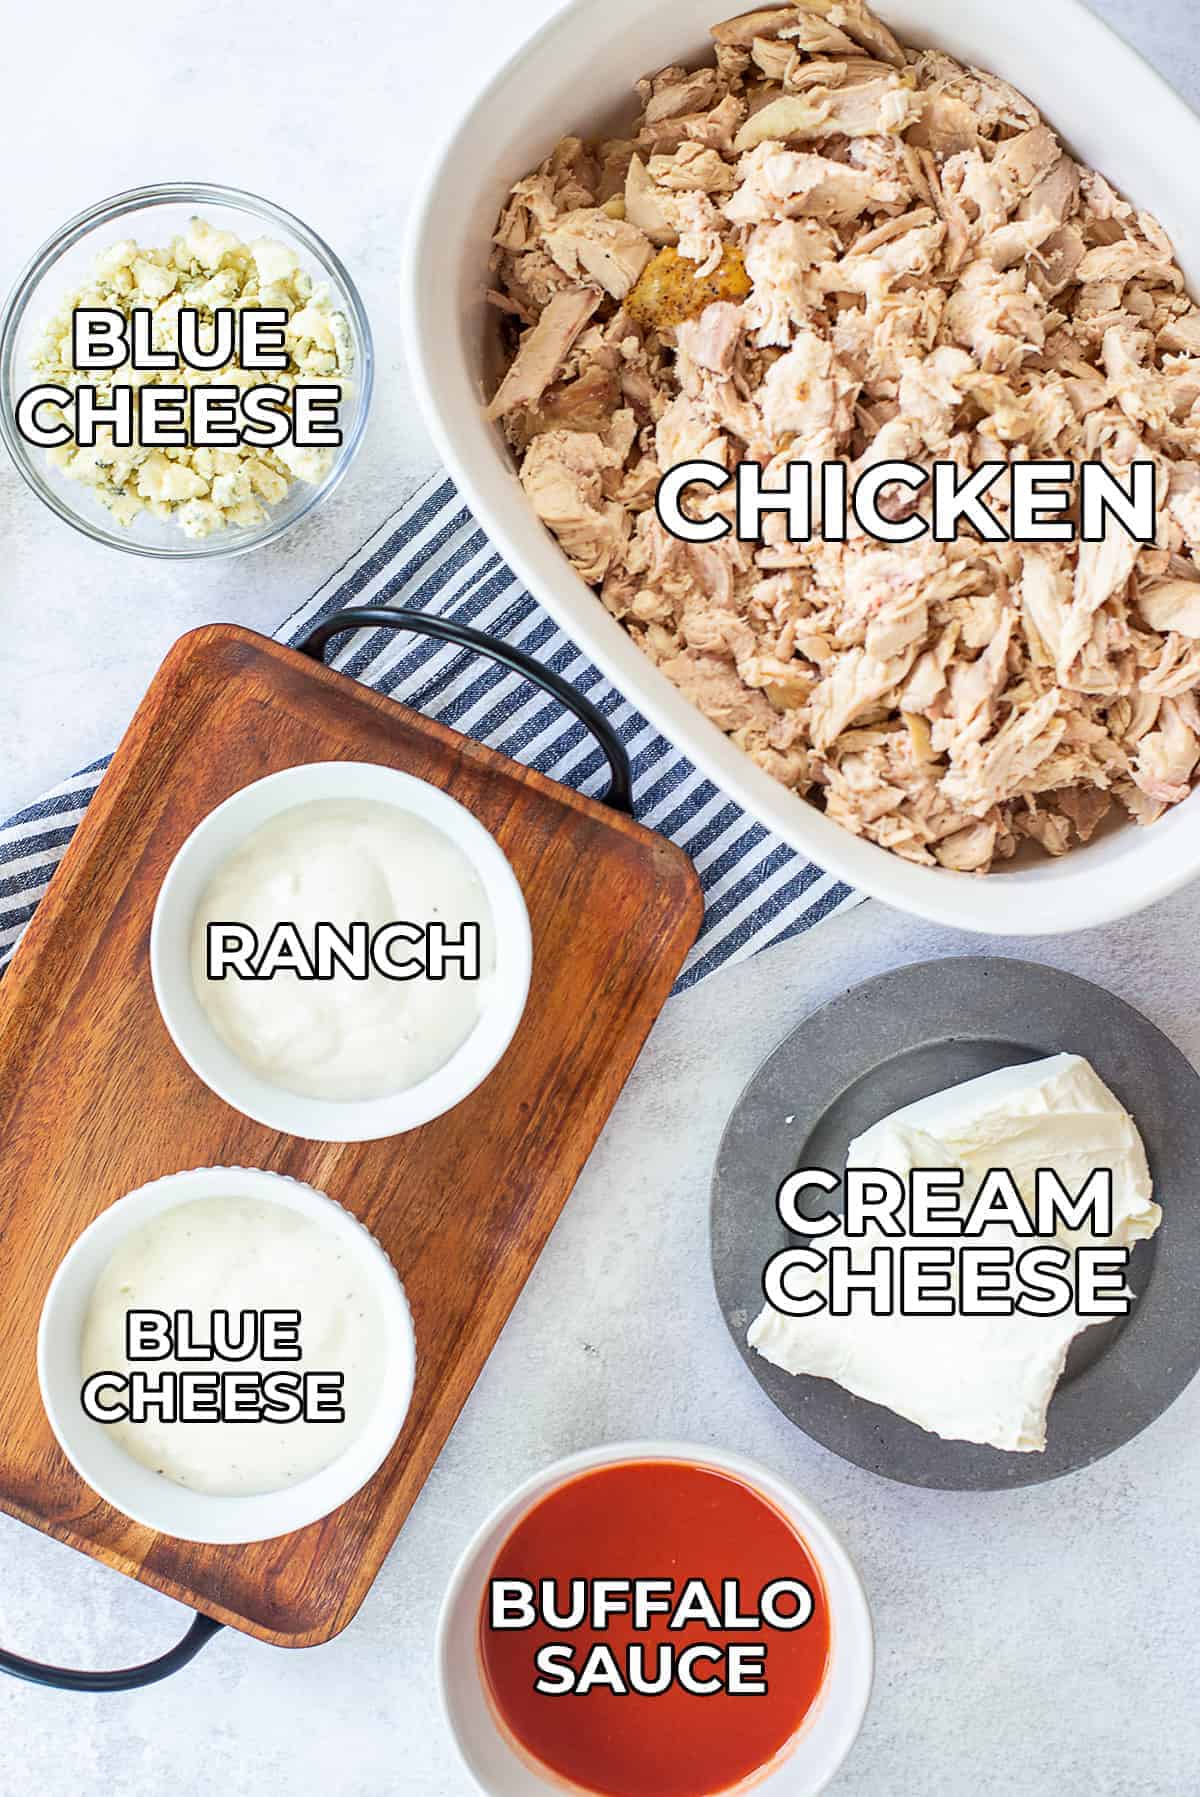 ingredients for buffalo chicken dip.